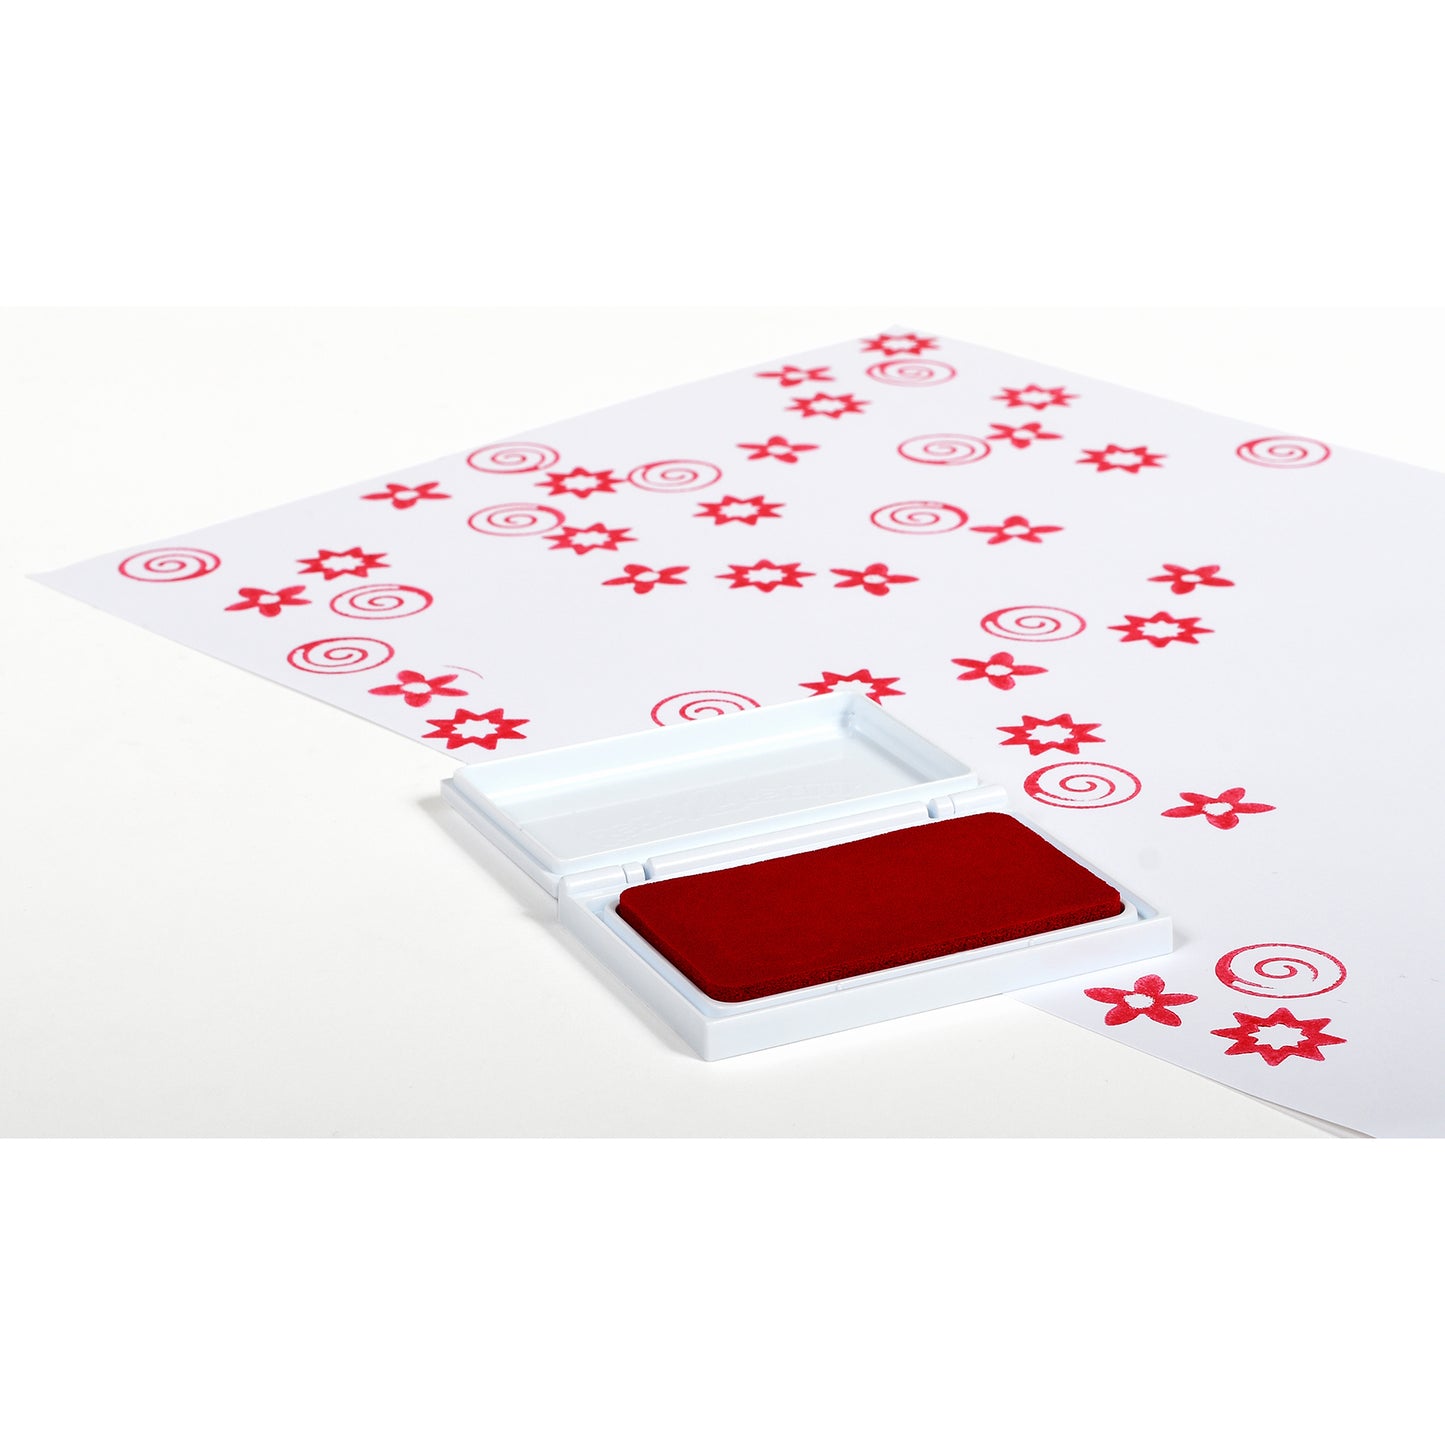 Washable Stamp Pad - Red - Pack of 6